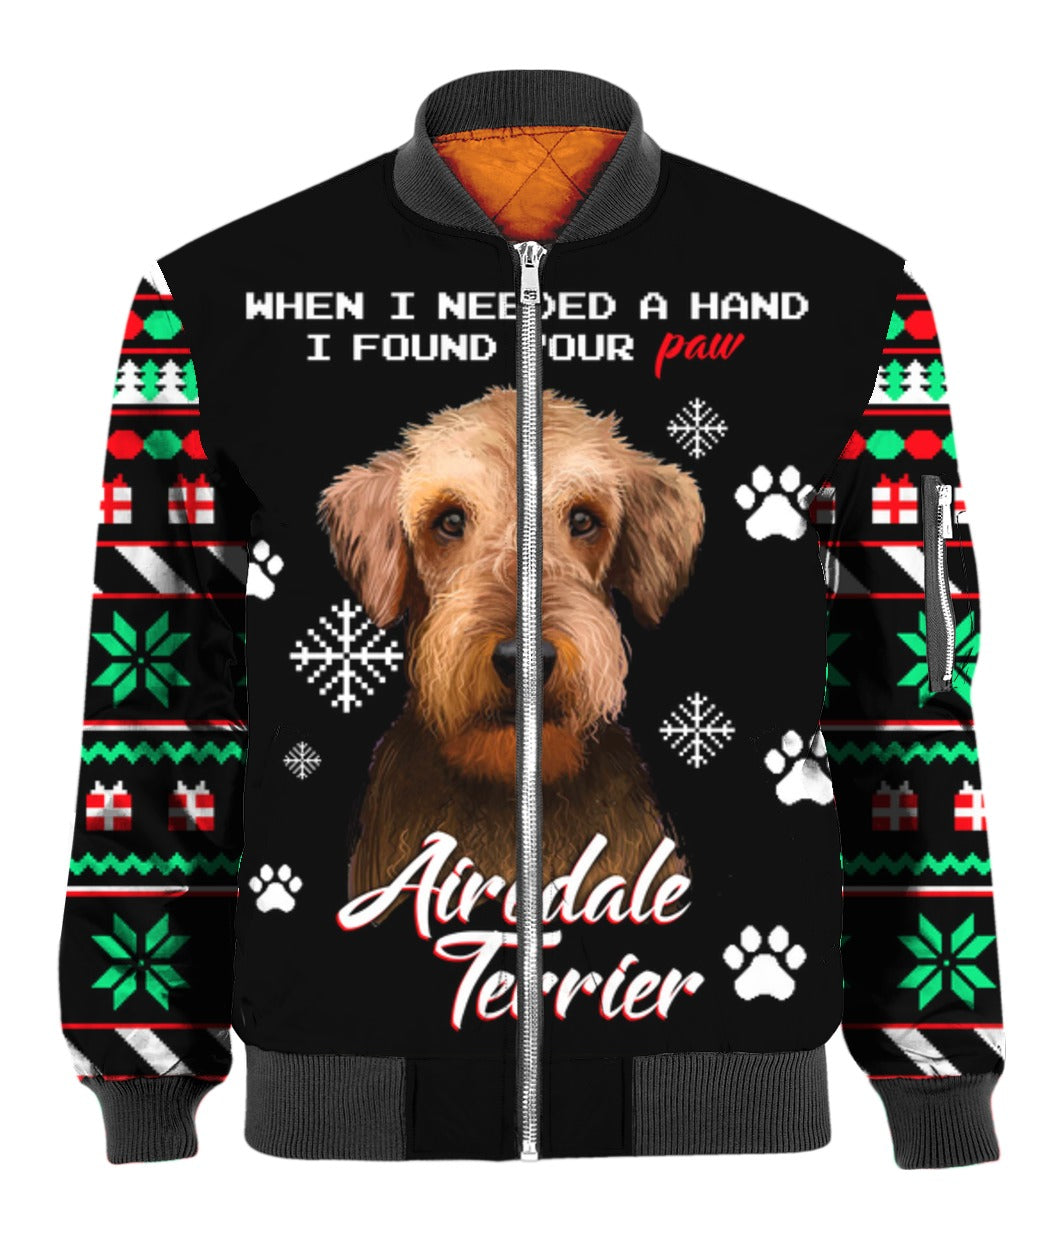 HQC0122 - AIREDALE TERRIER